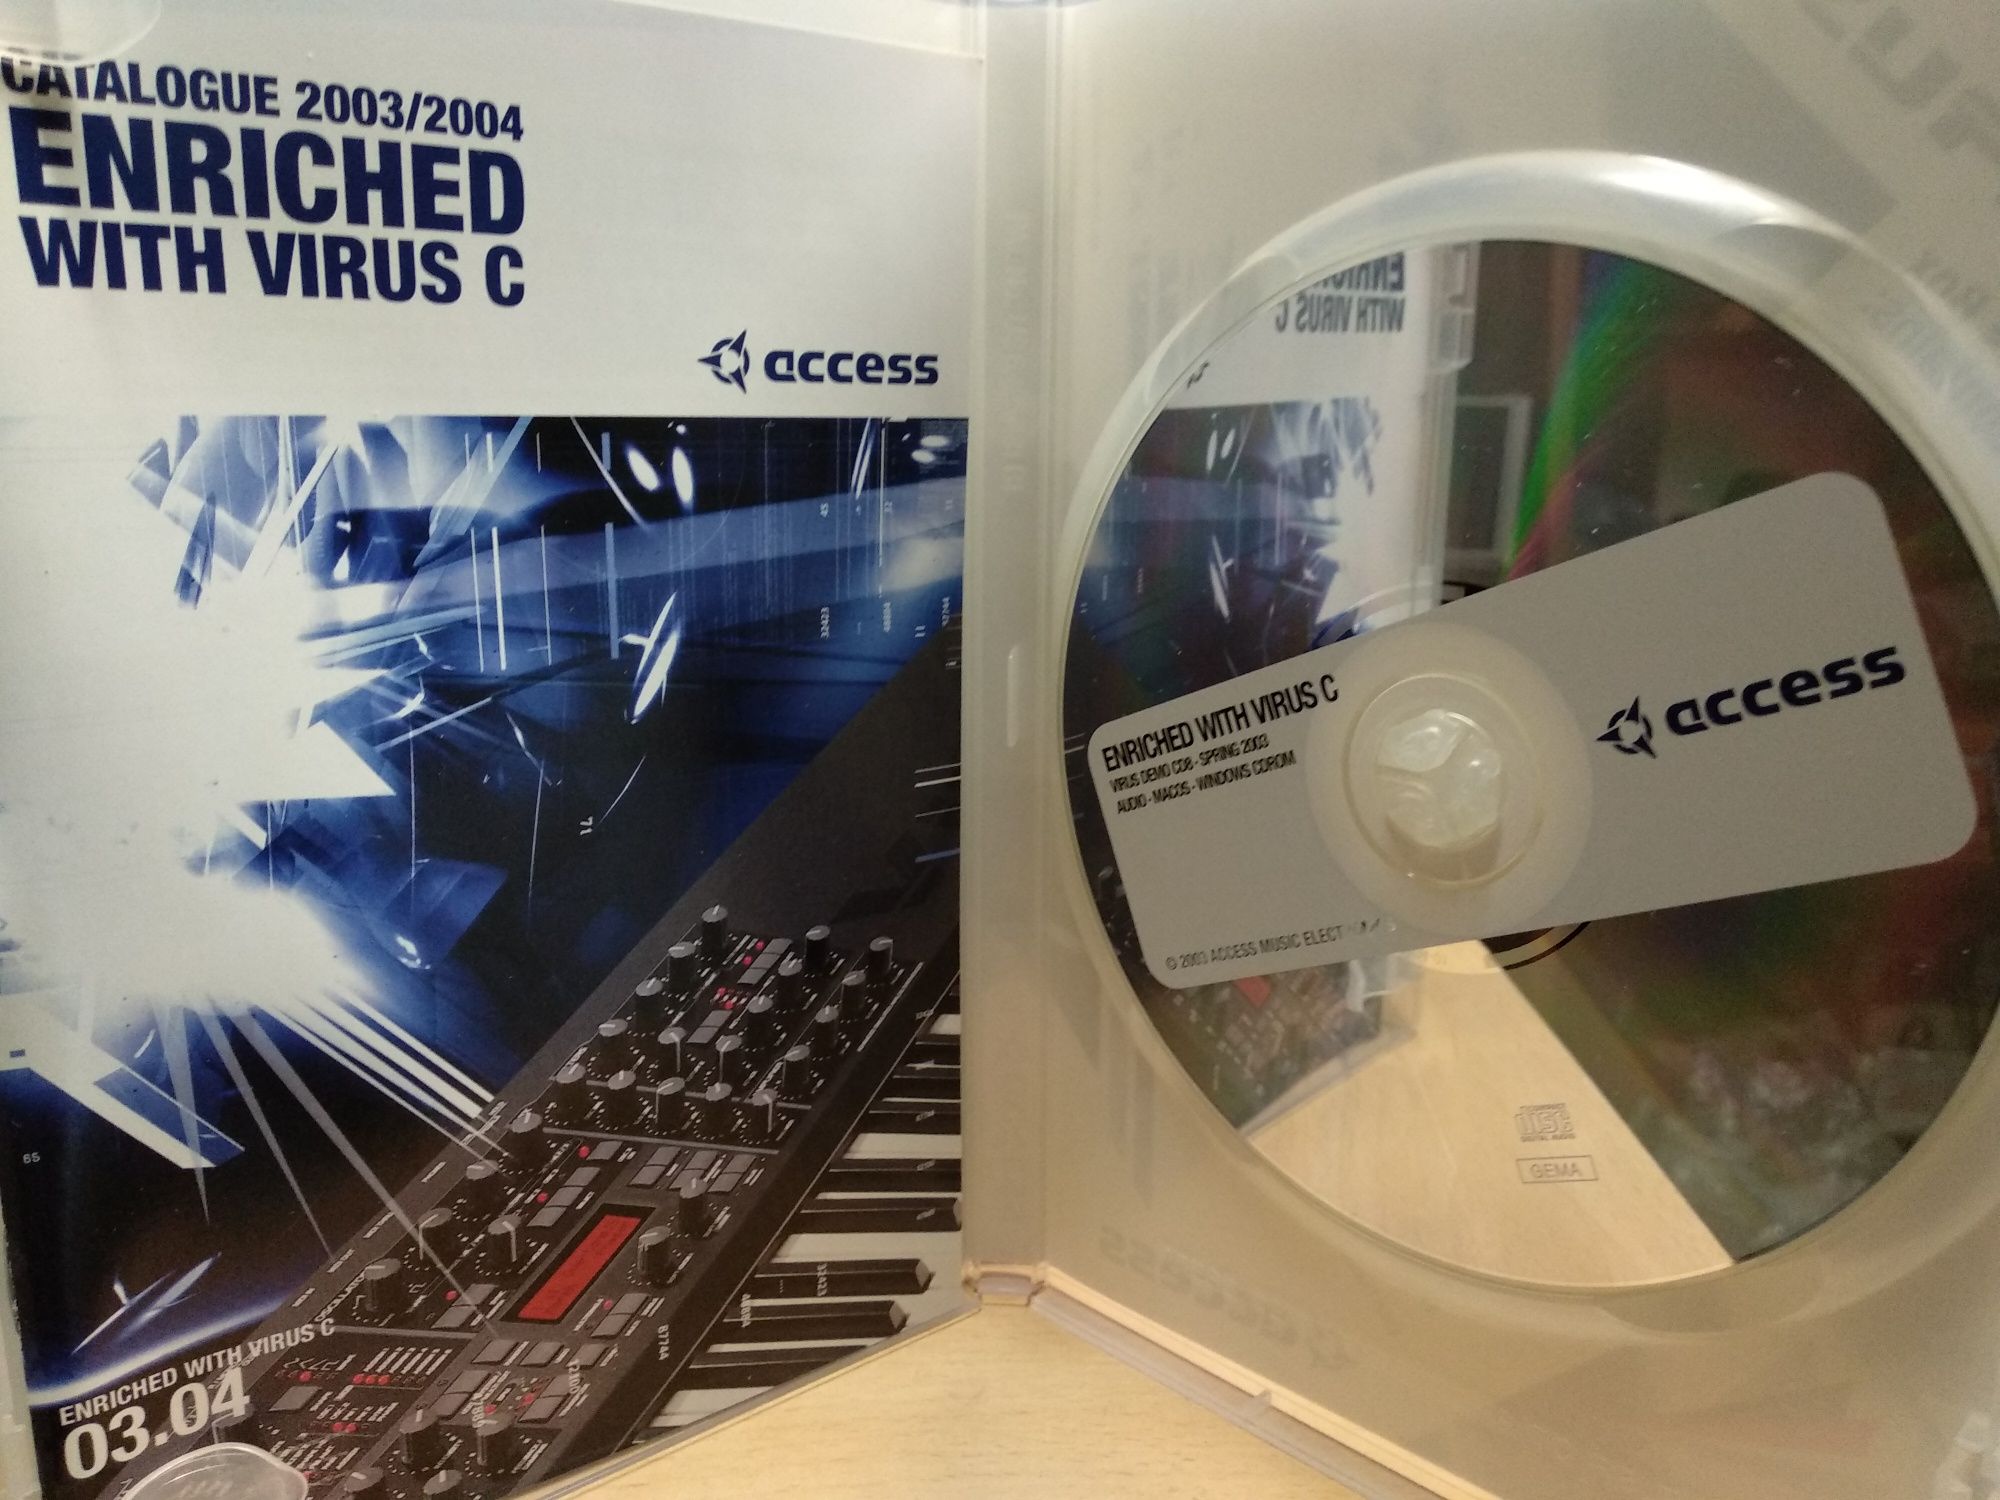 CD-ROM Enriched With Vírus C